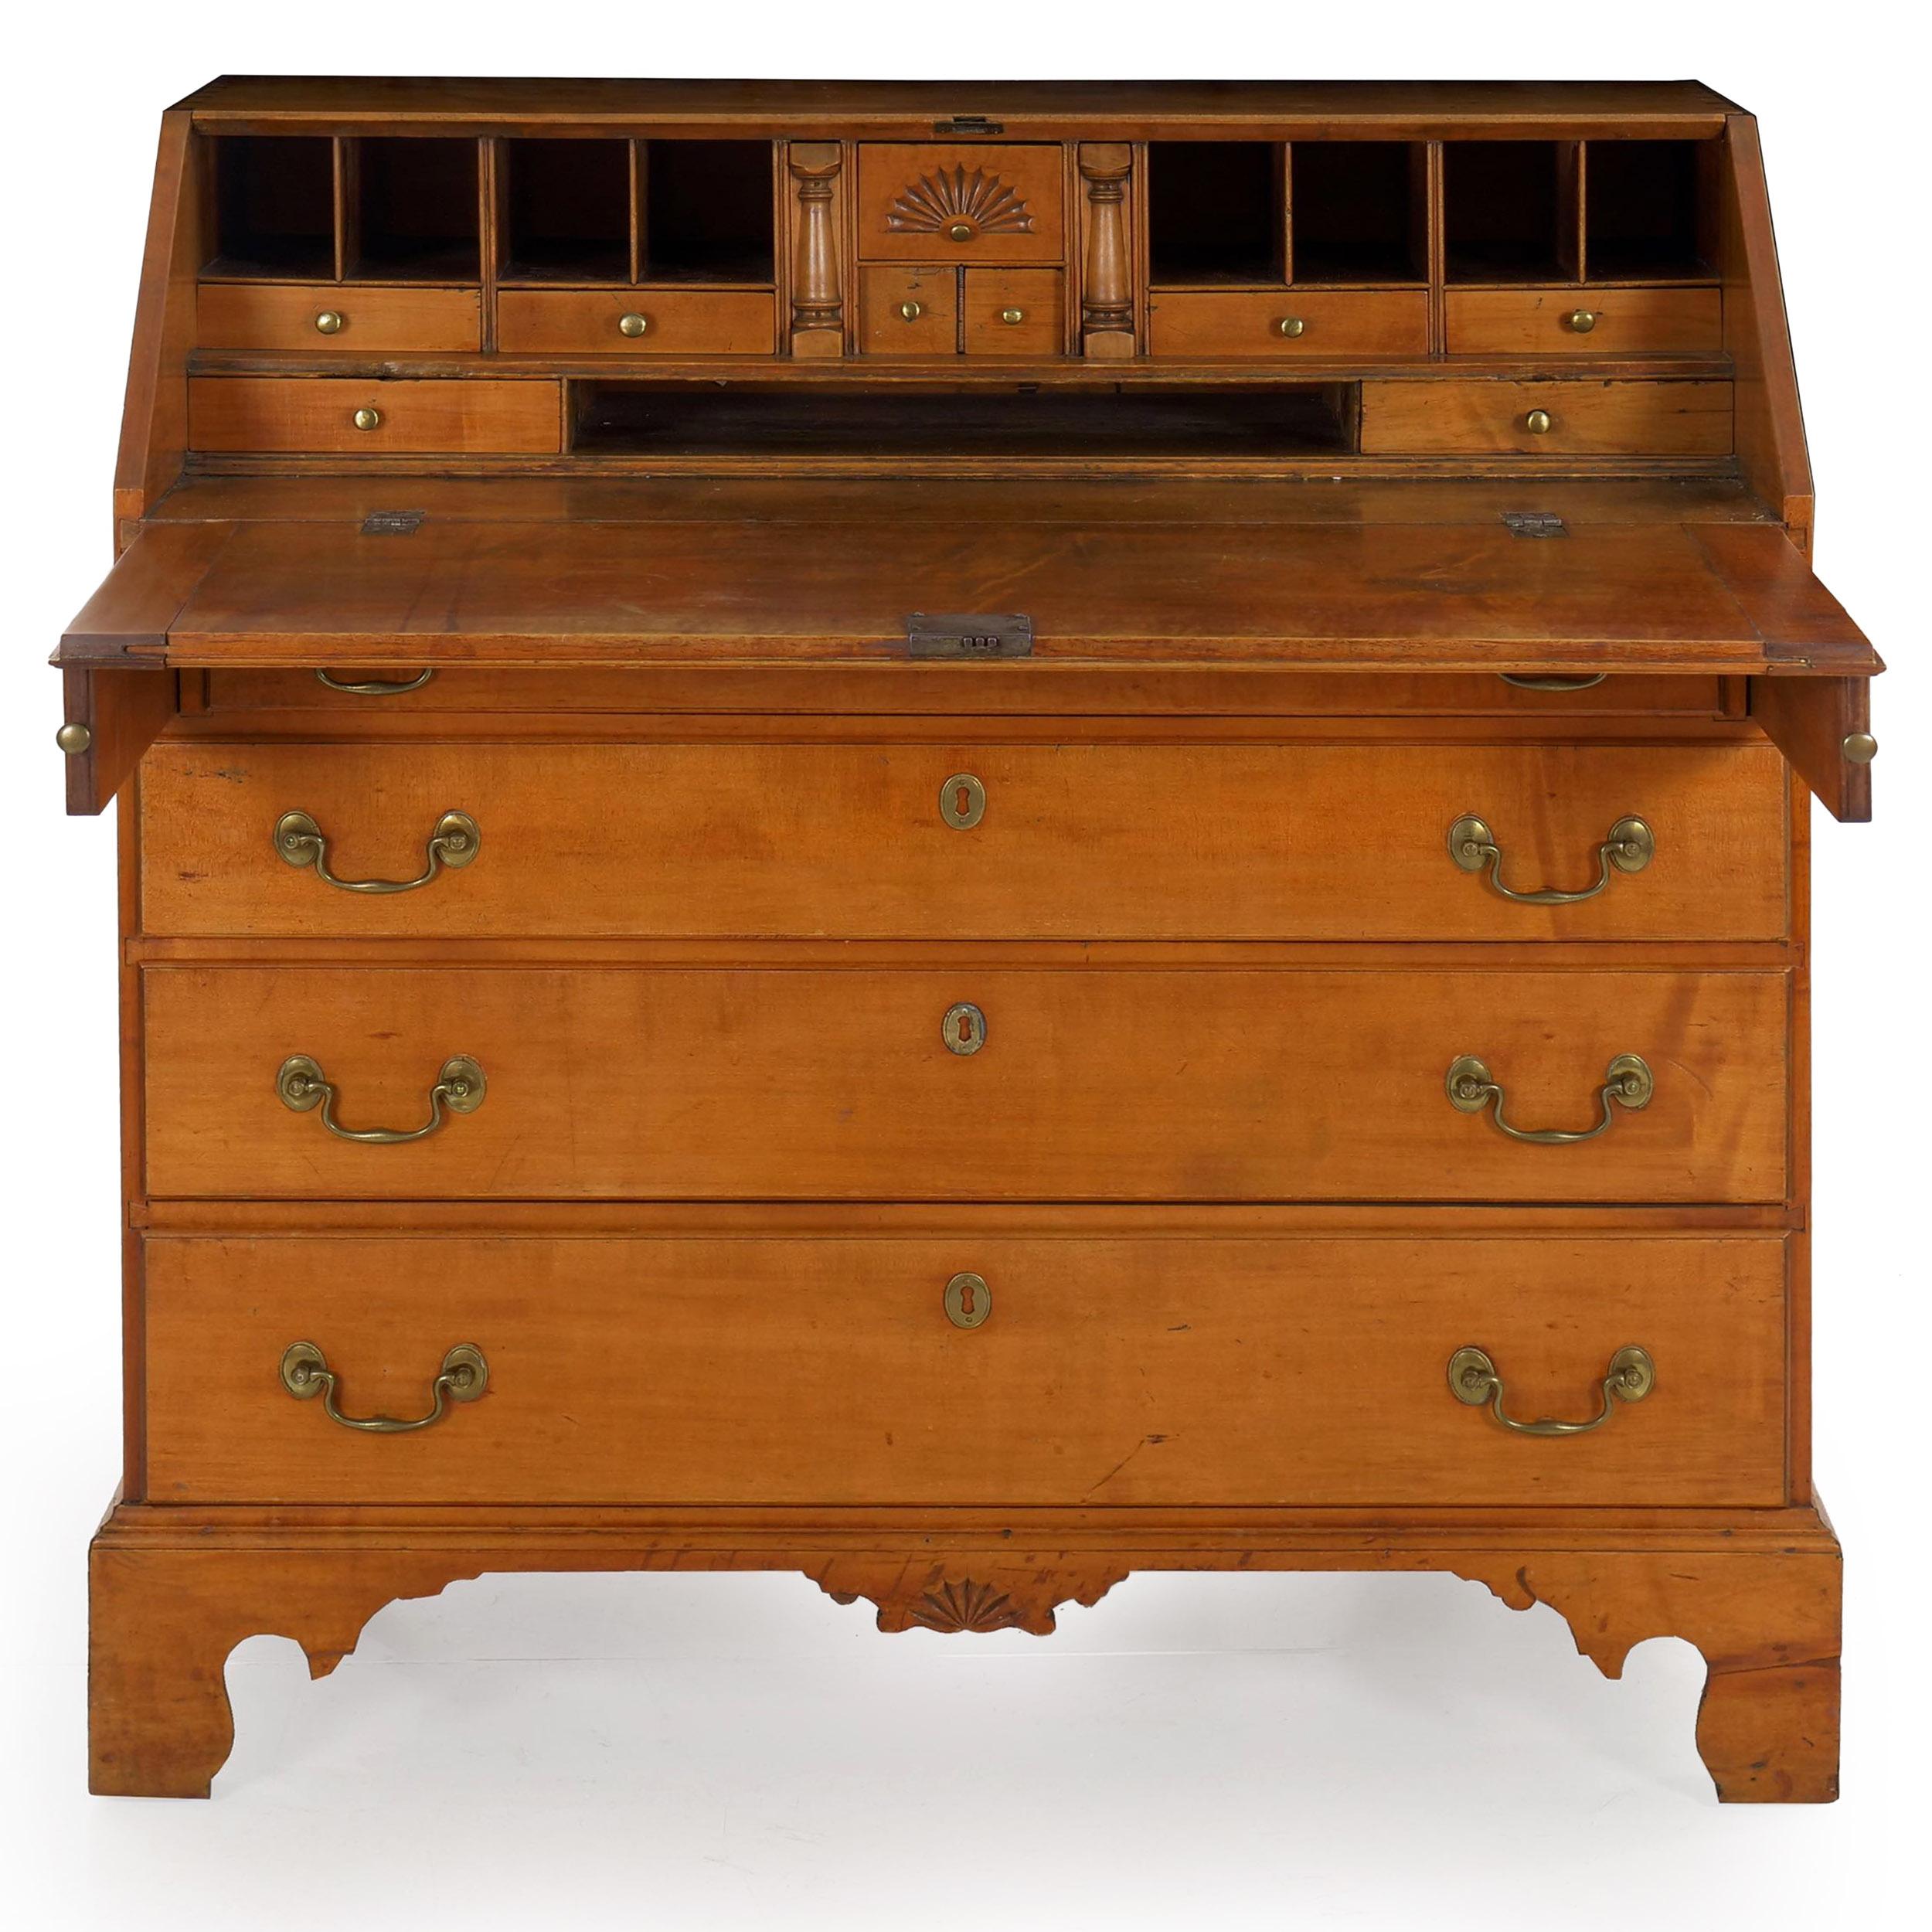 18th Century and Earlier American Chippendale Maple Antique Slant-Front Writing Desk, Massachusetts